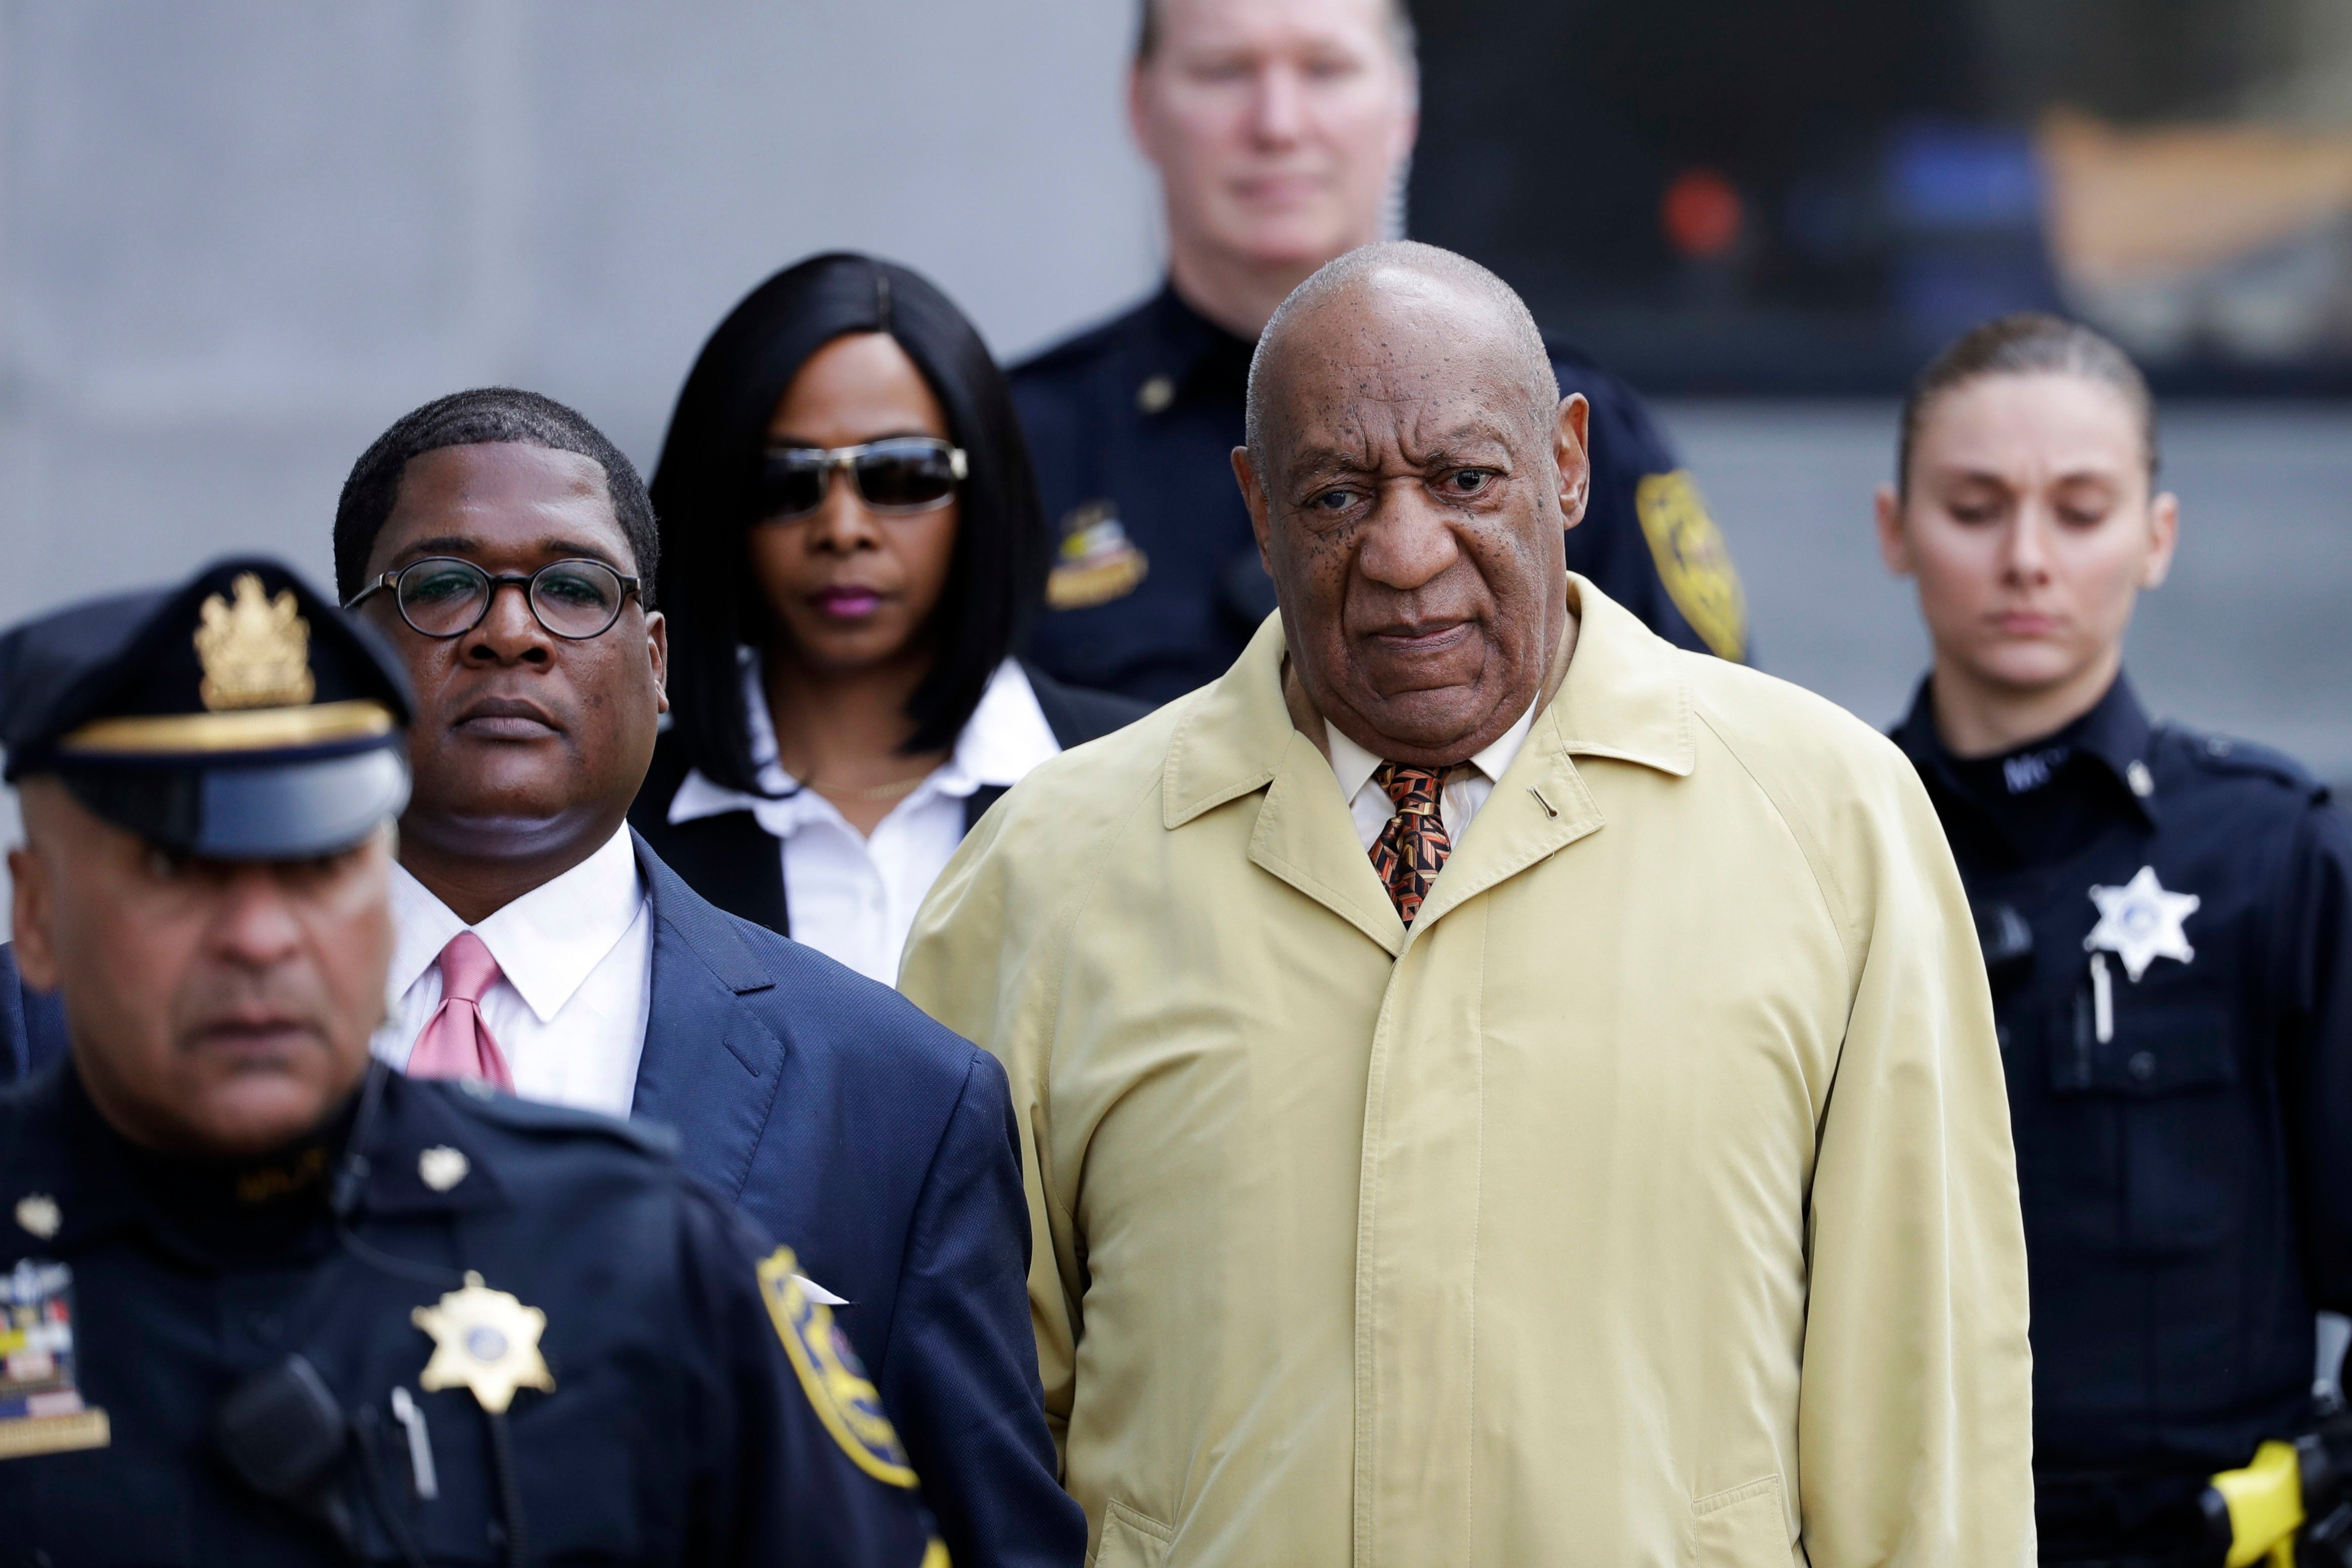 A Judge Has Rejected A Request To Move Bill Cosby’s Trial, But Will Bring In Outside Jury